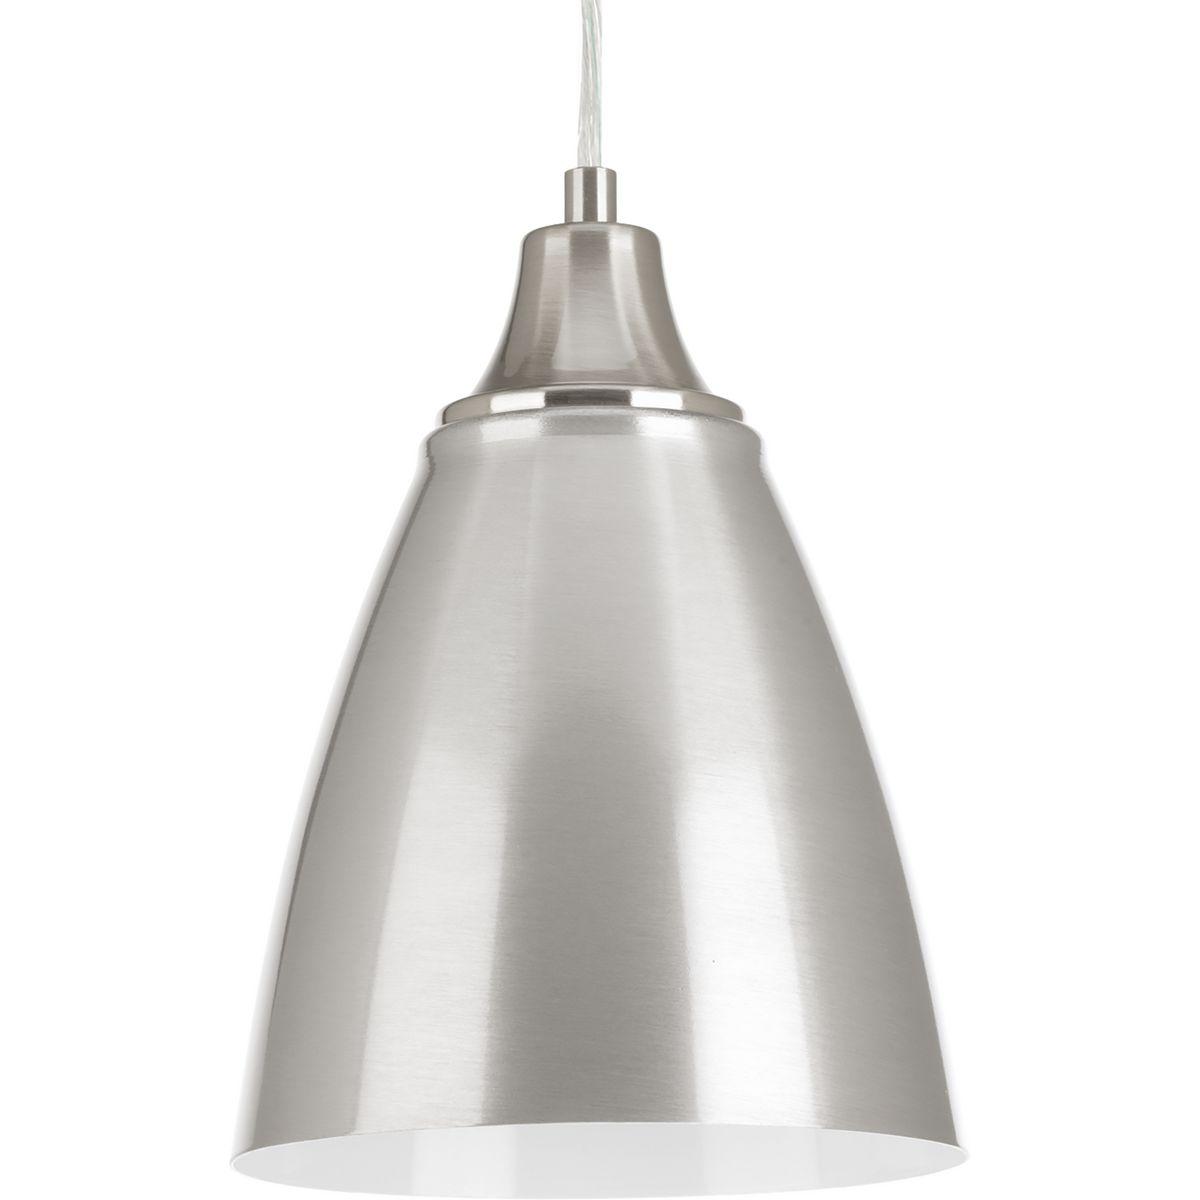 Hubbell P5175-0930K9 One-light LED pendant features designer oriented details. Brushed Nickel finish with polished white interior. 3000K, 90+ CRI, 623 lumens (source).  ; Designer oriented details. ; Sleek design. ; Brushed Nickel finish with polished white interior. ; Dimmab